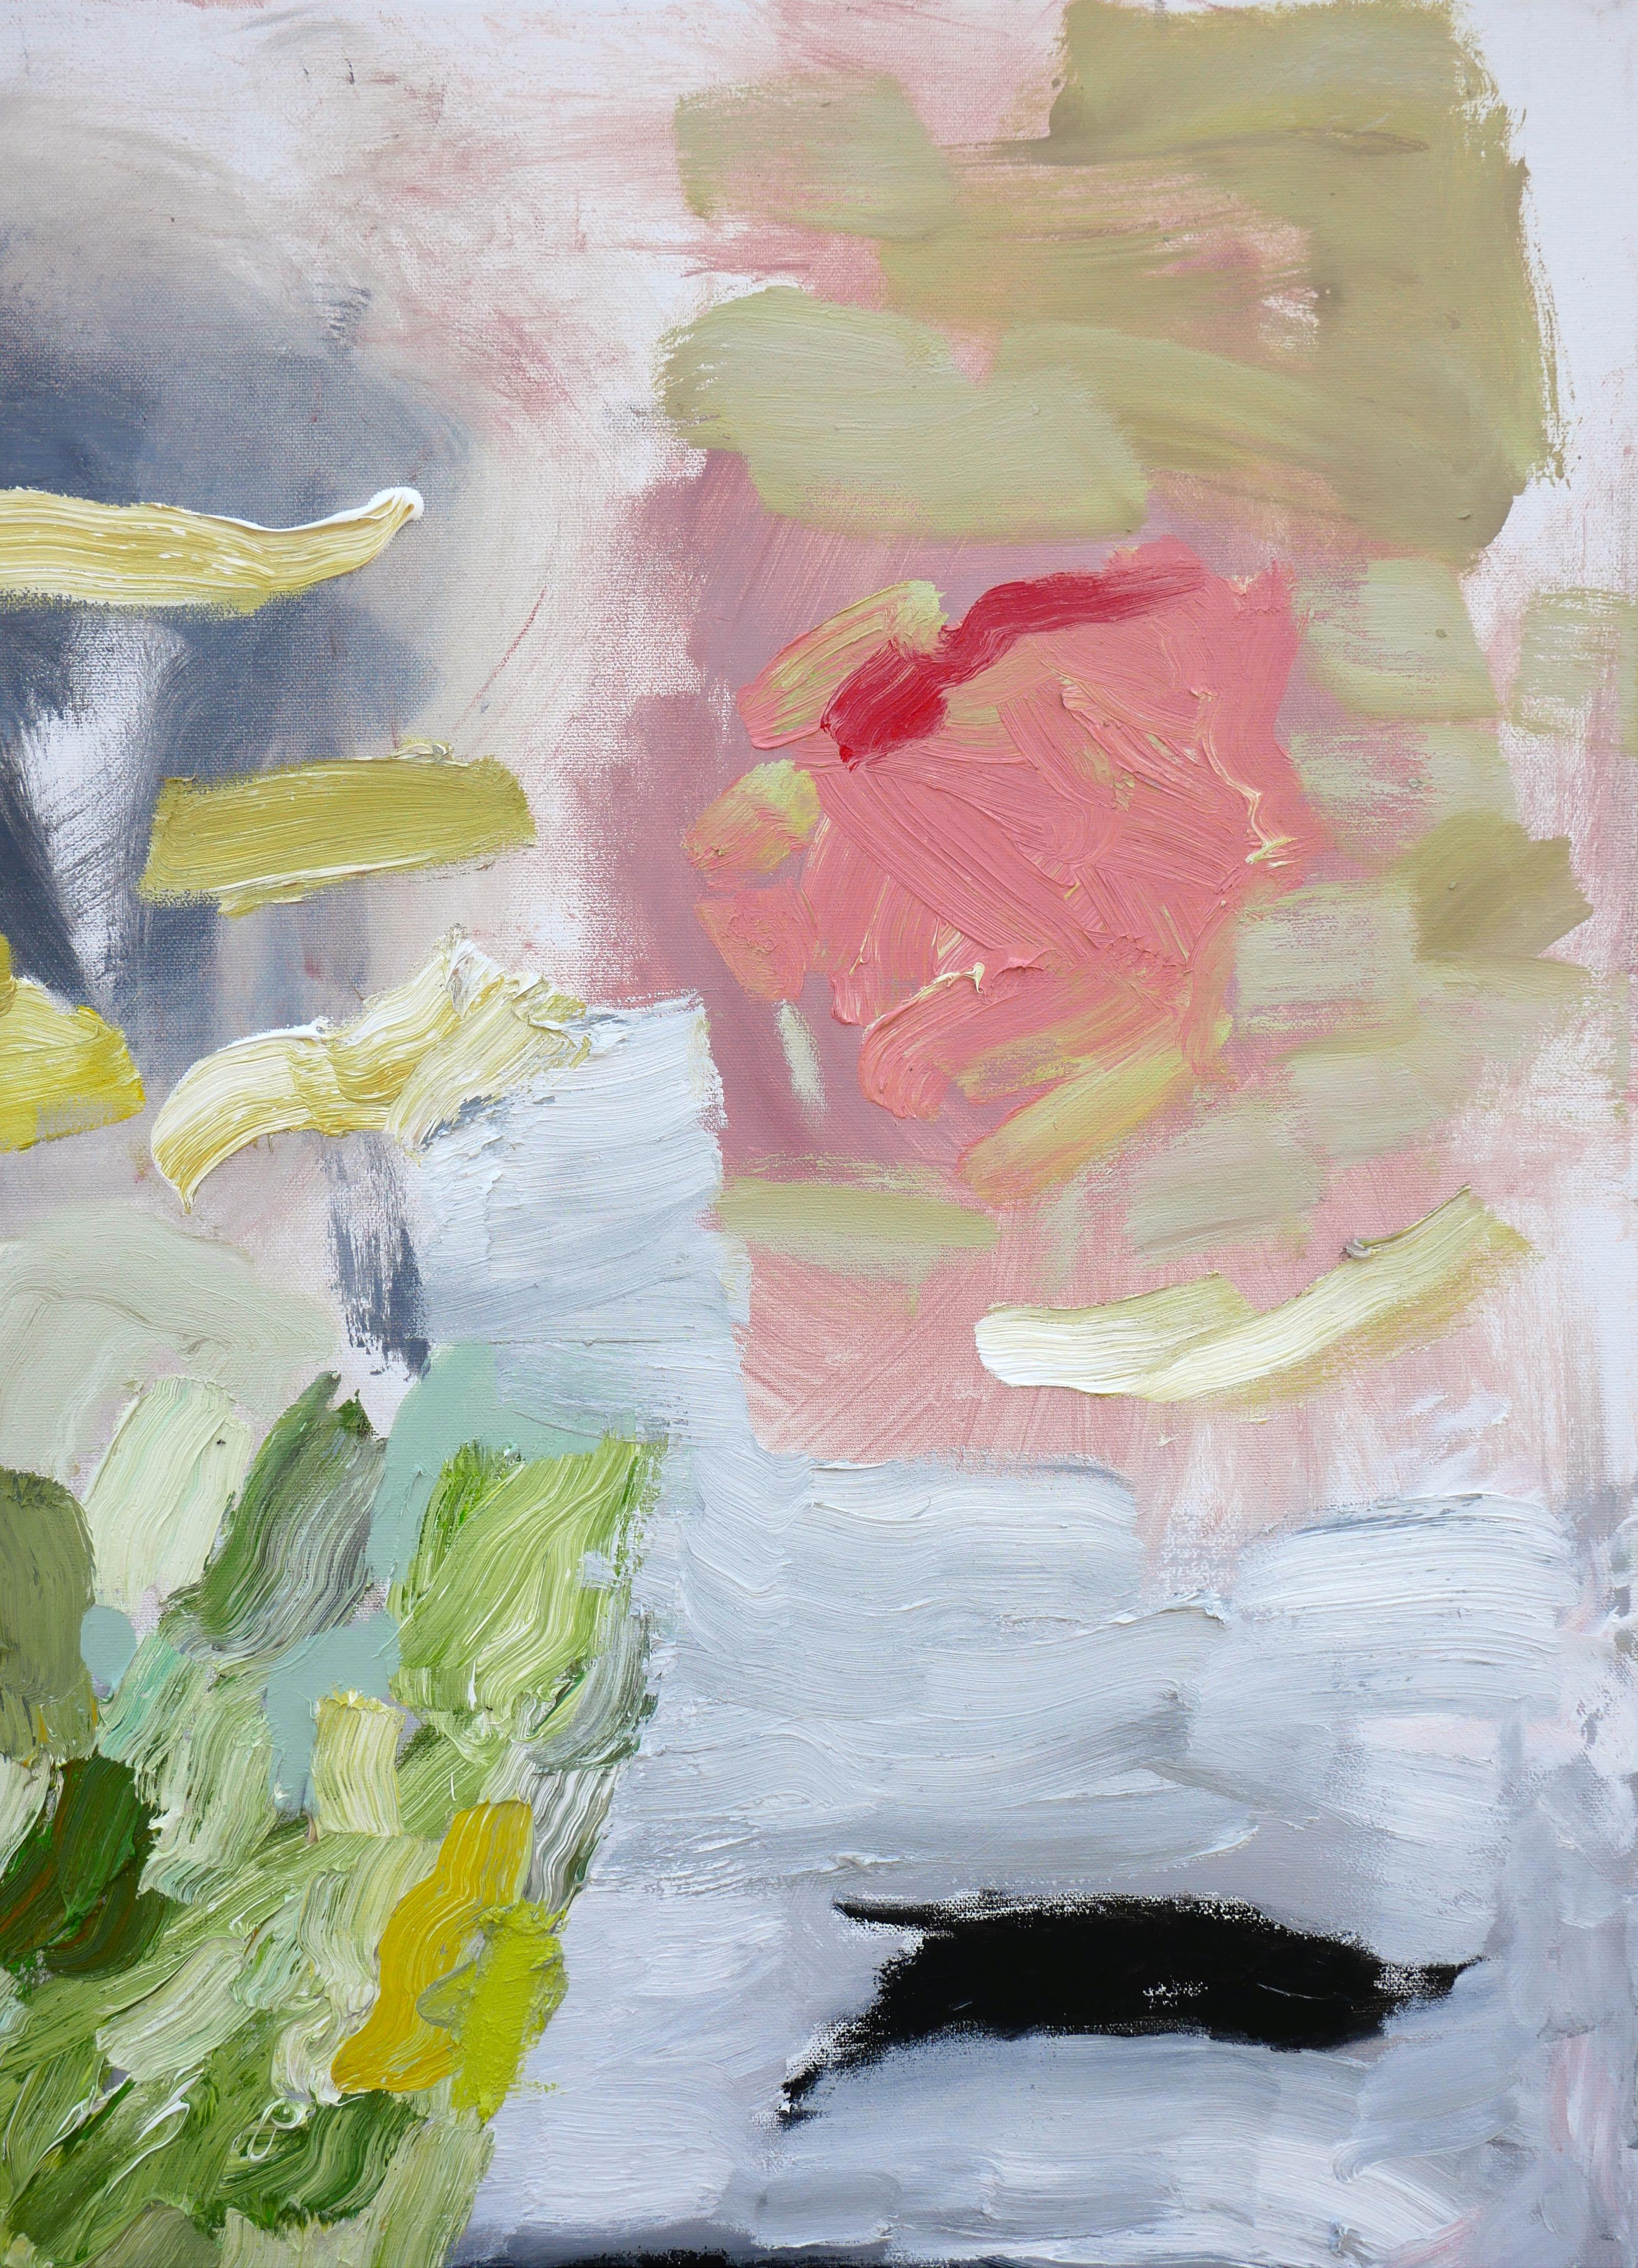 Abstract expressionist oil painting by contemporary Houston artist Benji Stiles. The work features gestural marks and rounded shapes in pastel pink, yellow, and green set against a light grey background. Currently unframed, but options are